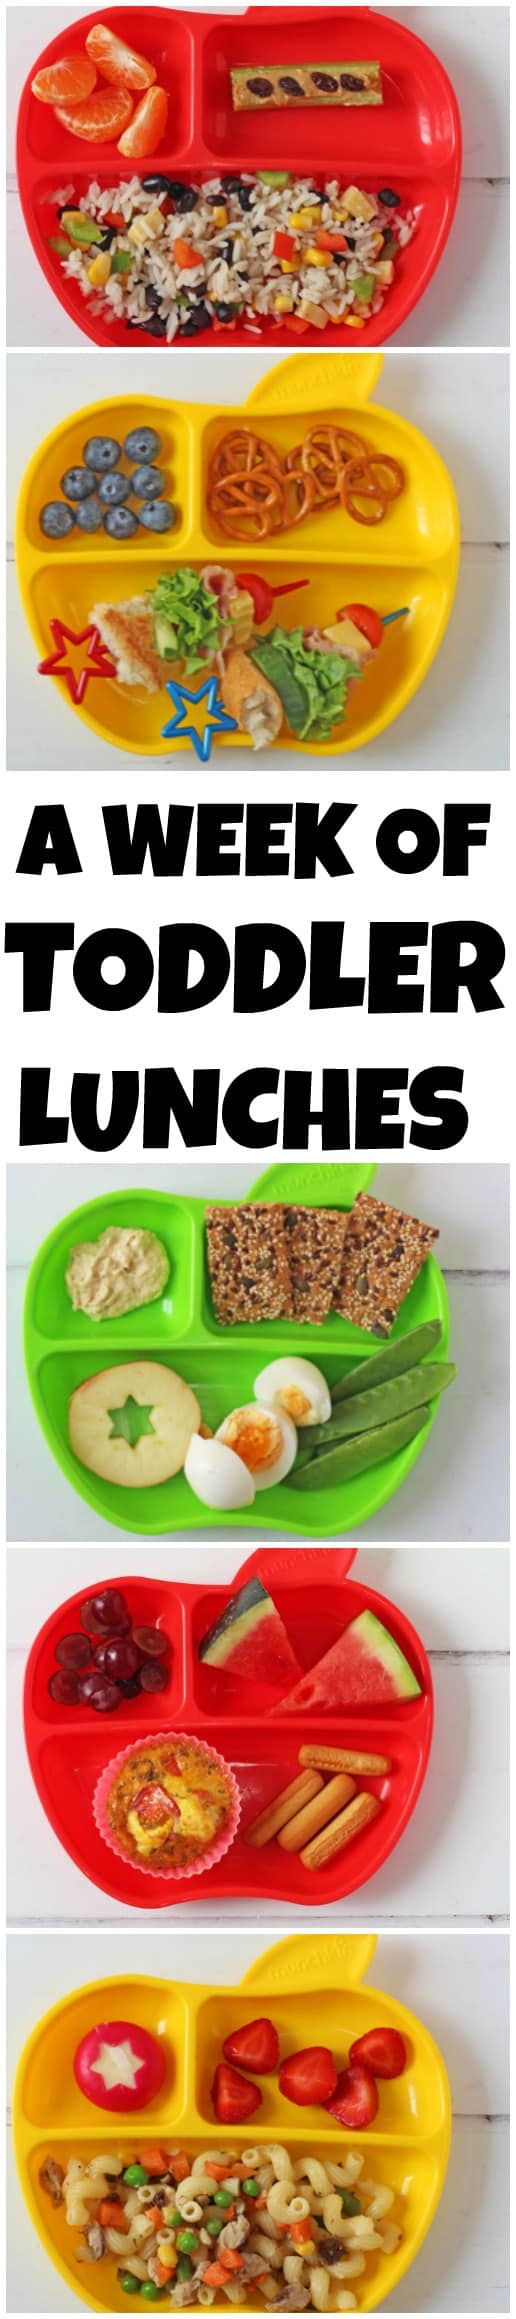 Quick Dinner Ideas For Toddlers Examples And Forms - BEST HOME DESIGN IDEAS